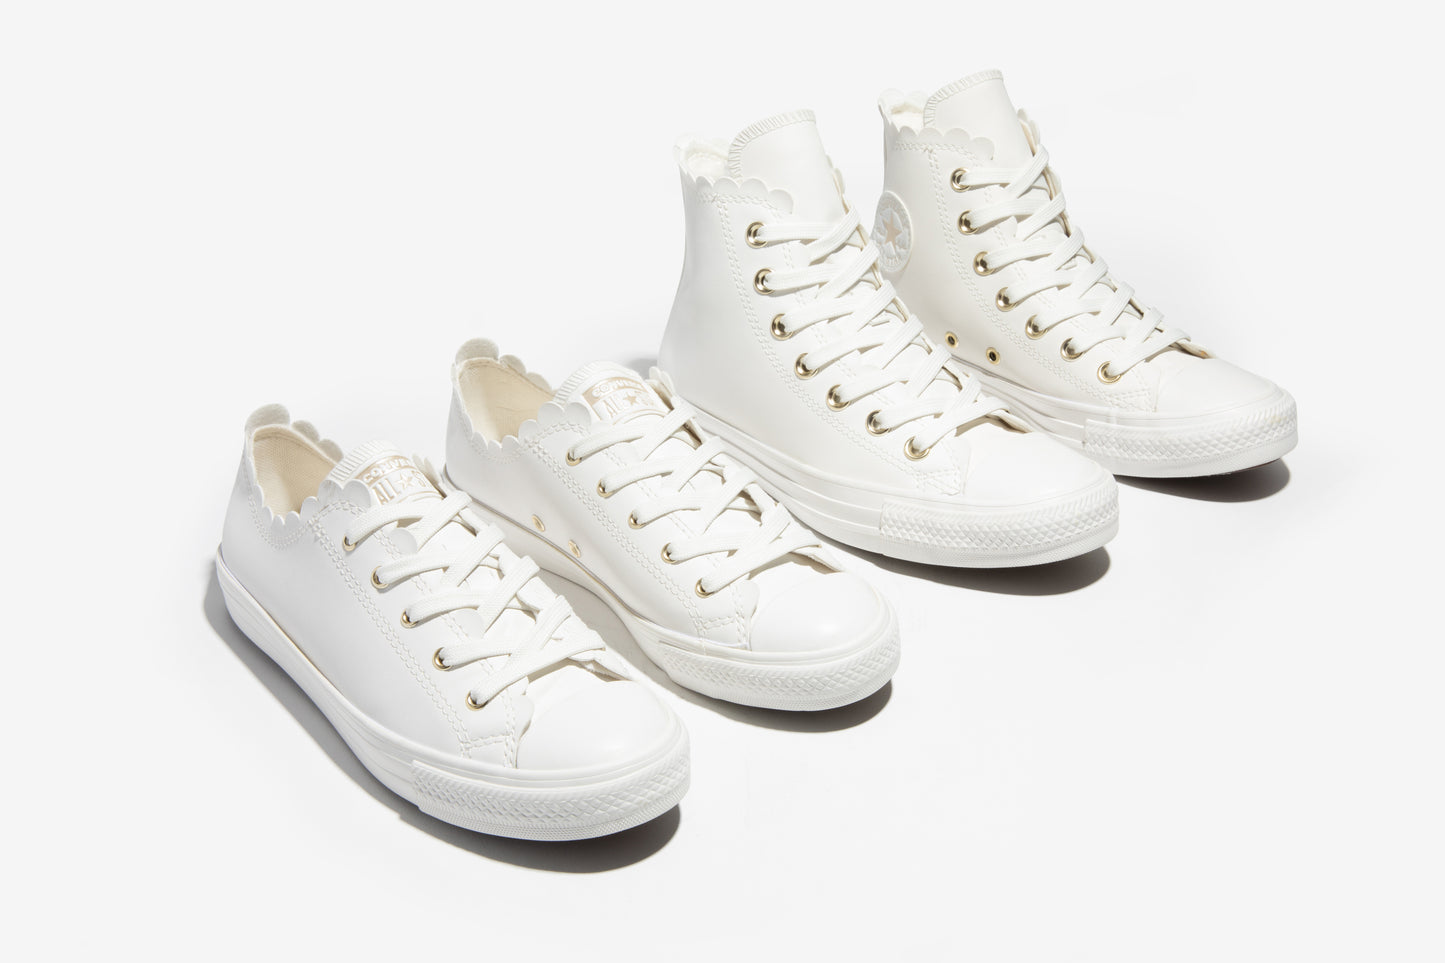 + Converse CT Dainty Faux Leather [LOW TOP ONLY] SCALLOPED EDGE Vintage White - (A02611) - CT1 - R1L8